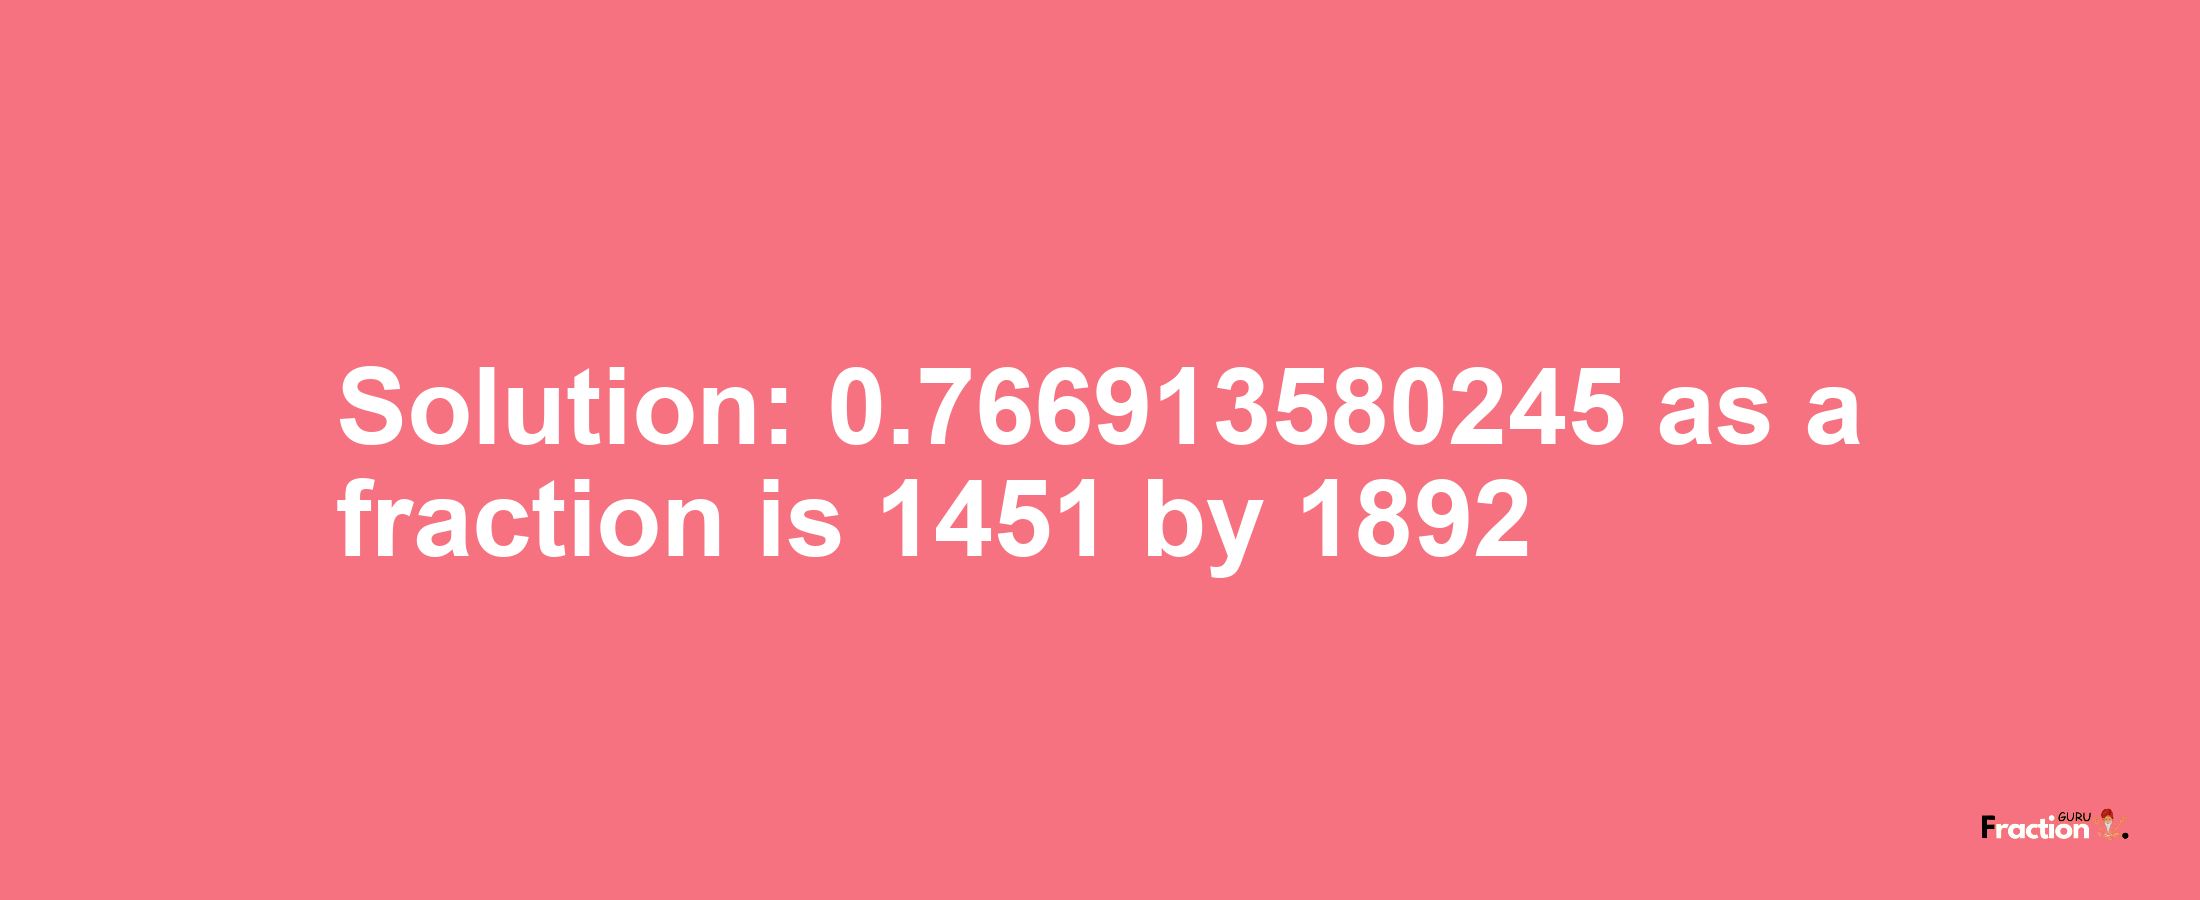 Solution:0.766913580245 as a fraction is 1451/1892